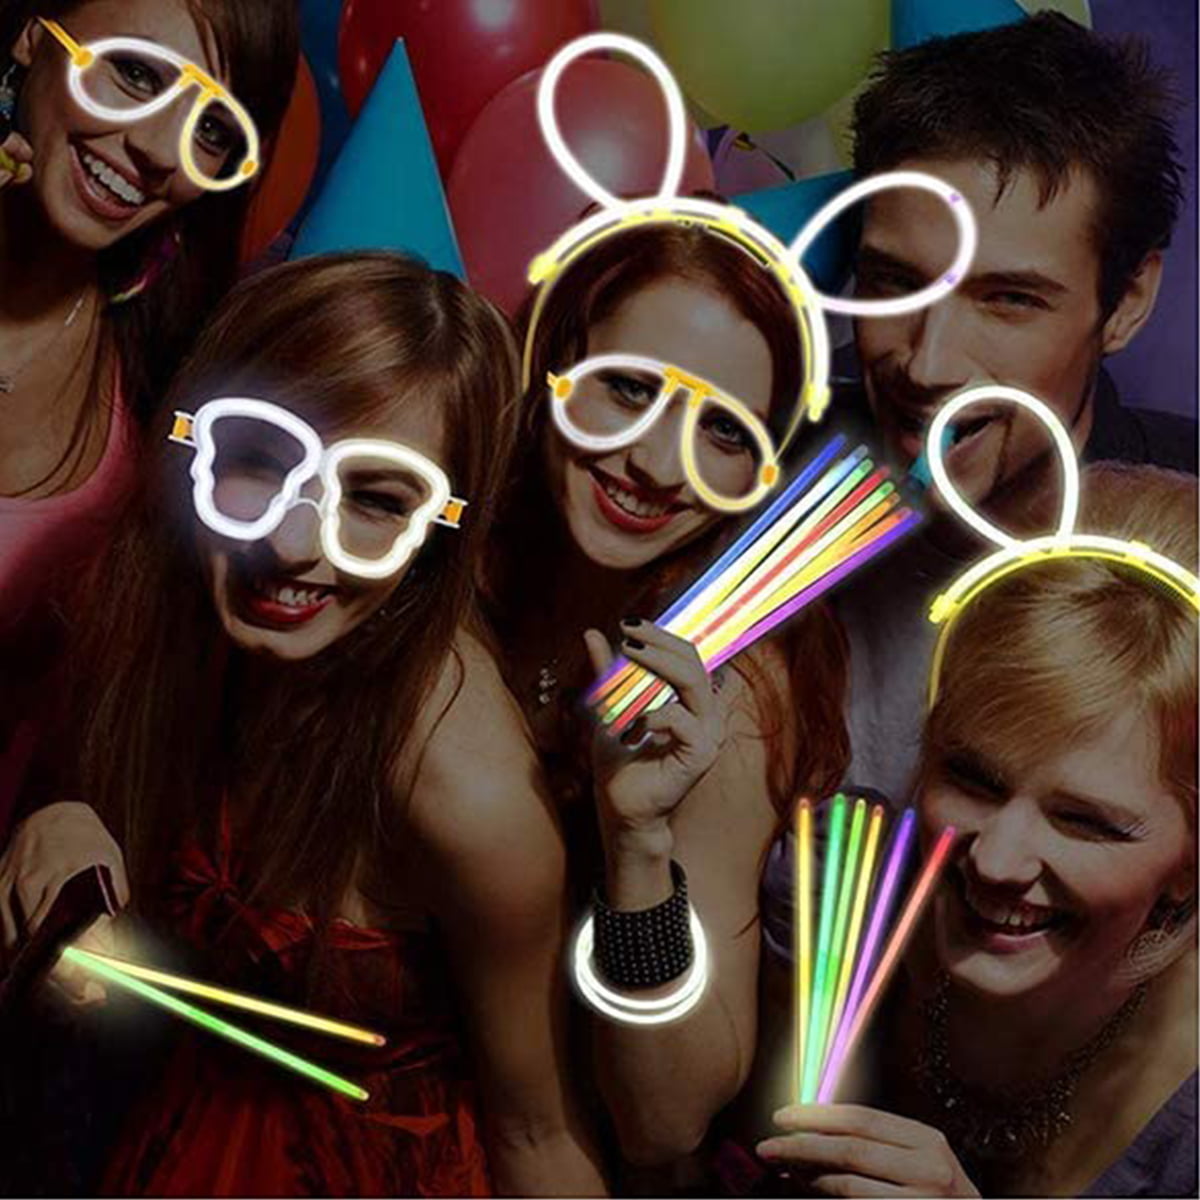 Wanna Party Glow Sticks Bulk Party Supplies. 100 Pack. 8 Inch Glow in the  Dark Sticks, Light Up Party Favors. Neon Glow Bracelets and Glow Necklaces  with Connectors. Glow Party Decorations :